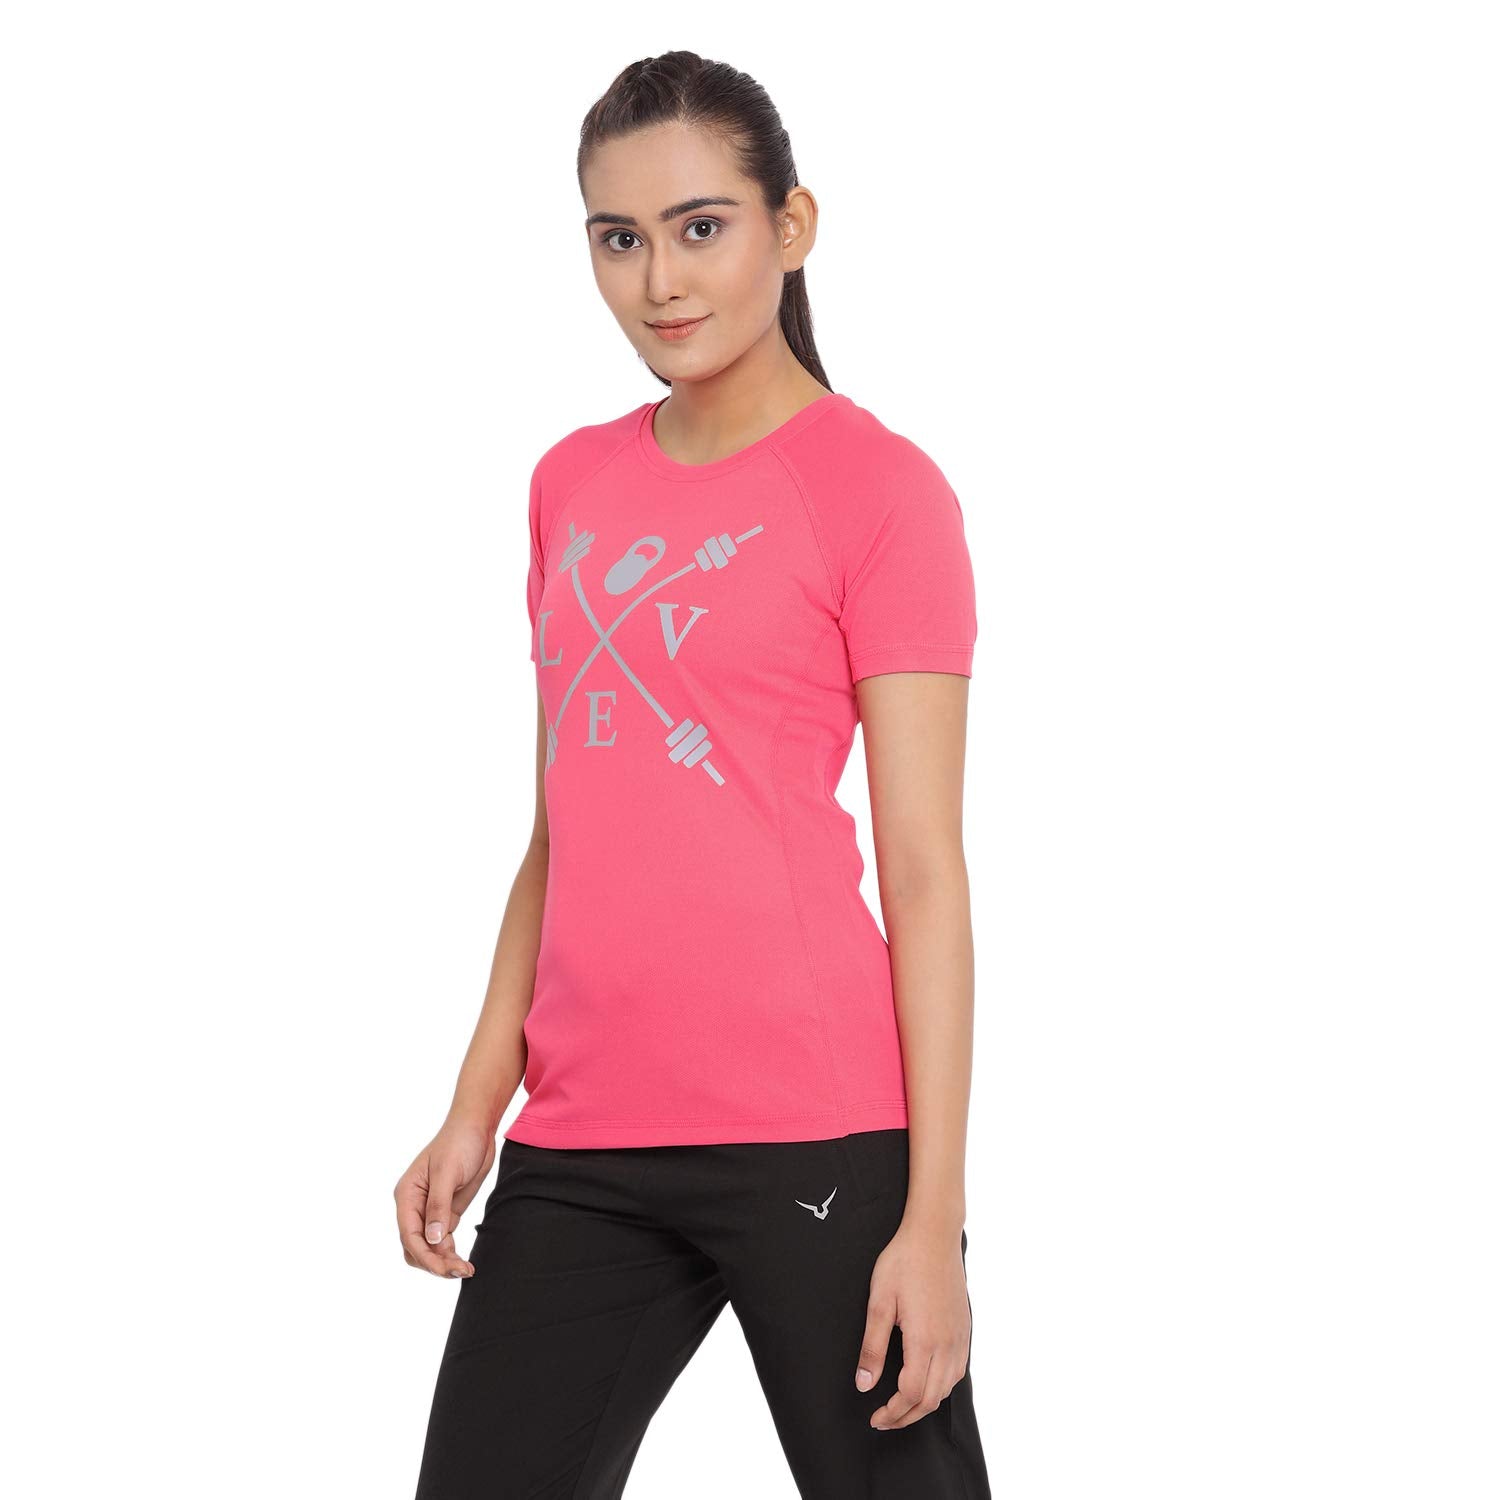 Invincible Women’s Gym Love Round Neck Workout T-Shirt